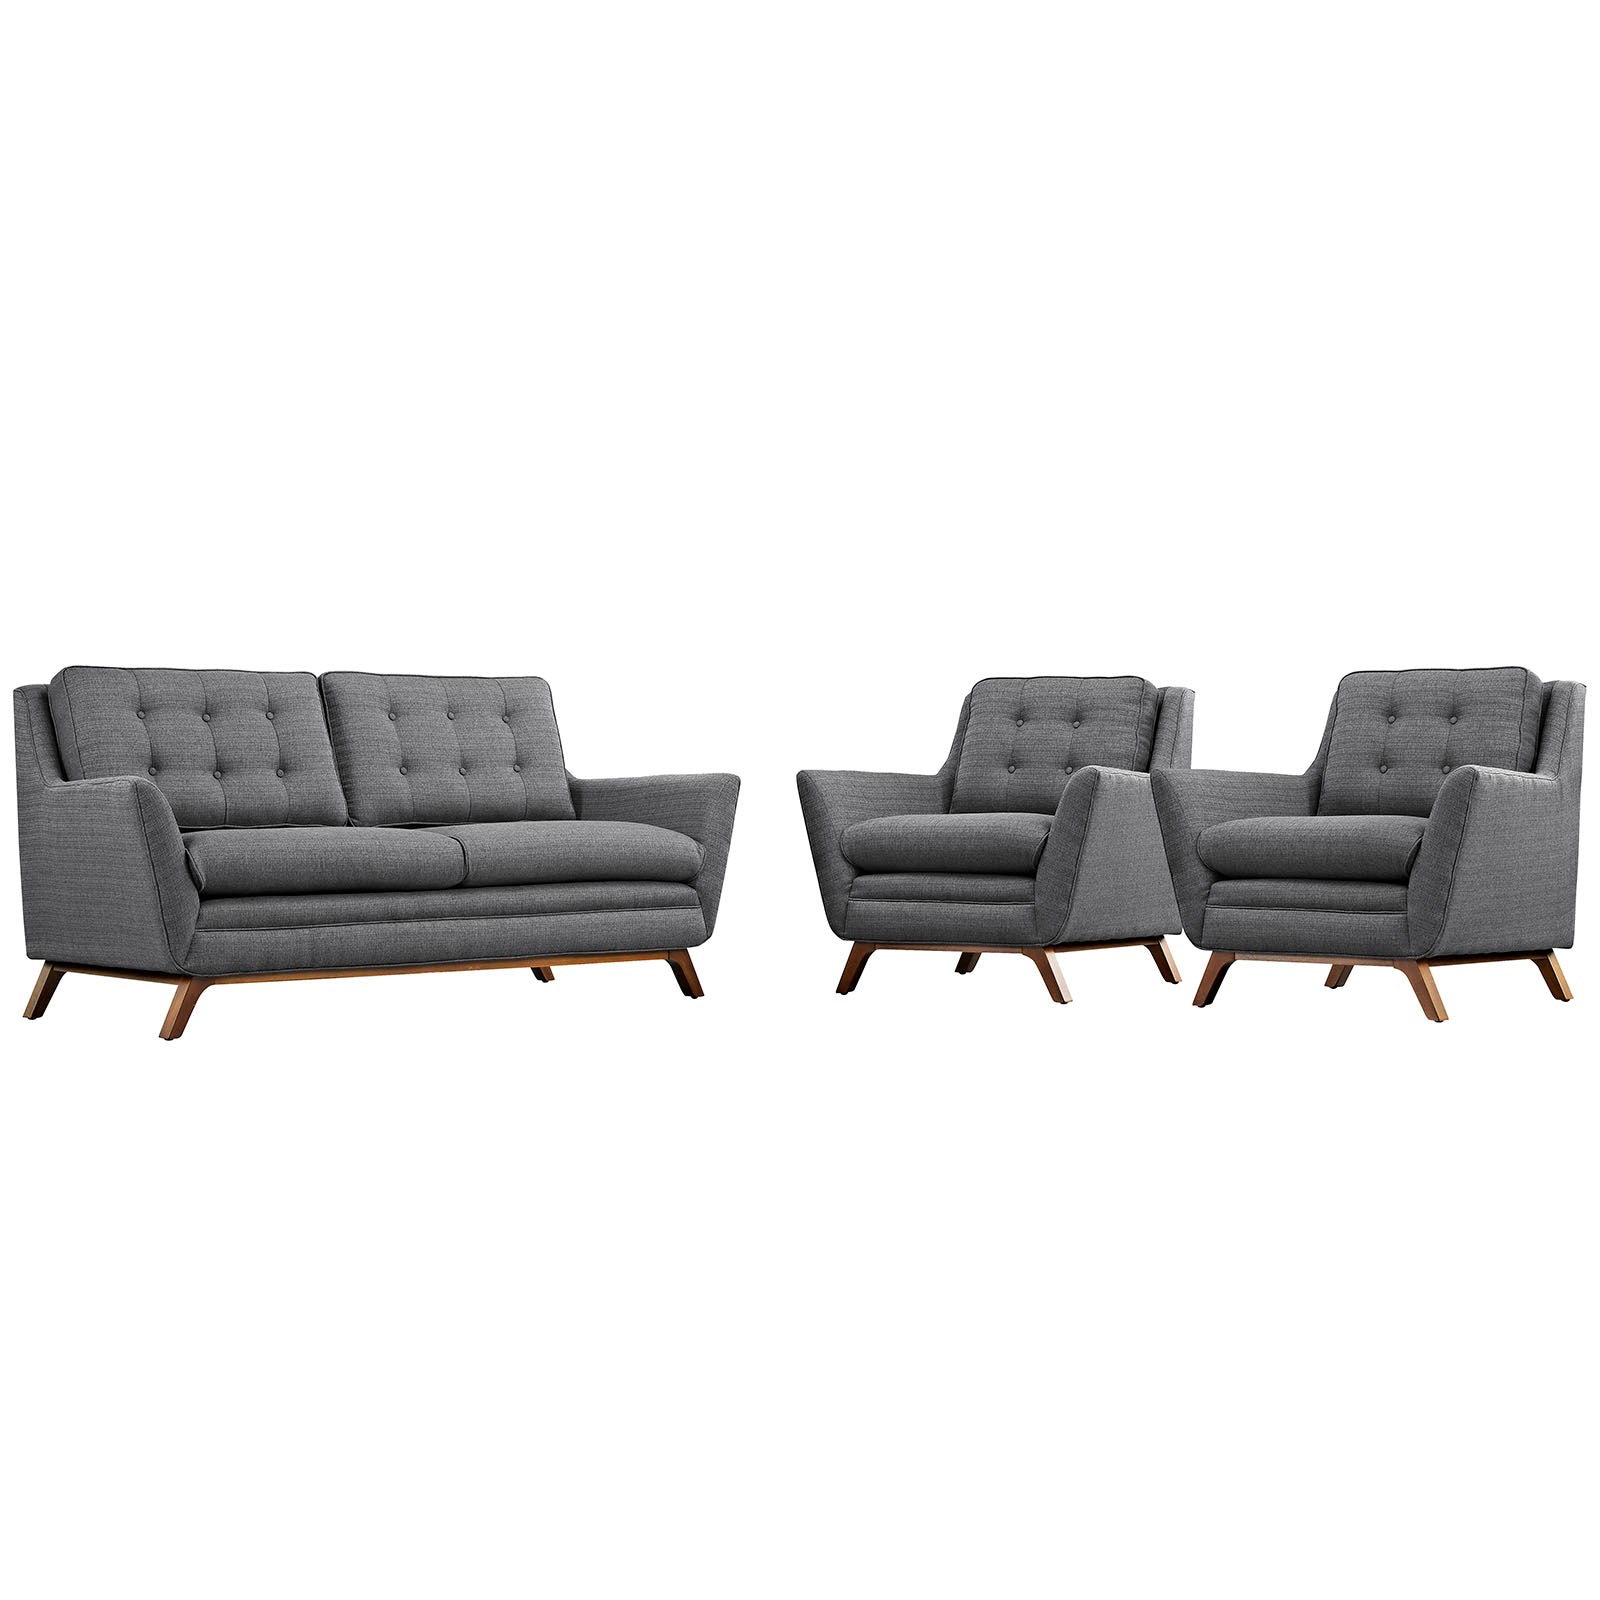 Modway Living Room Sets - Beguile 3 Piece Upholstered Fabric Living Room Set Gray 107"